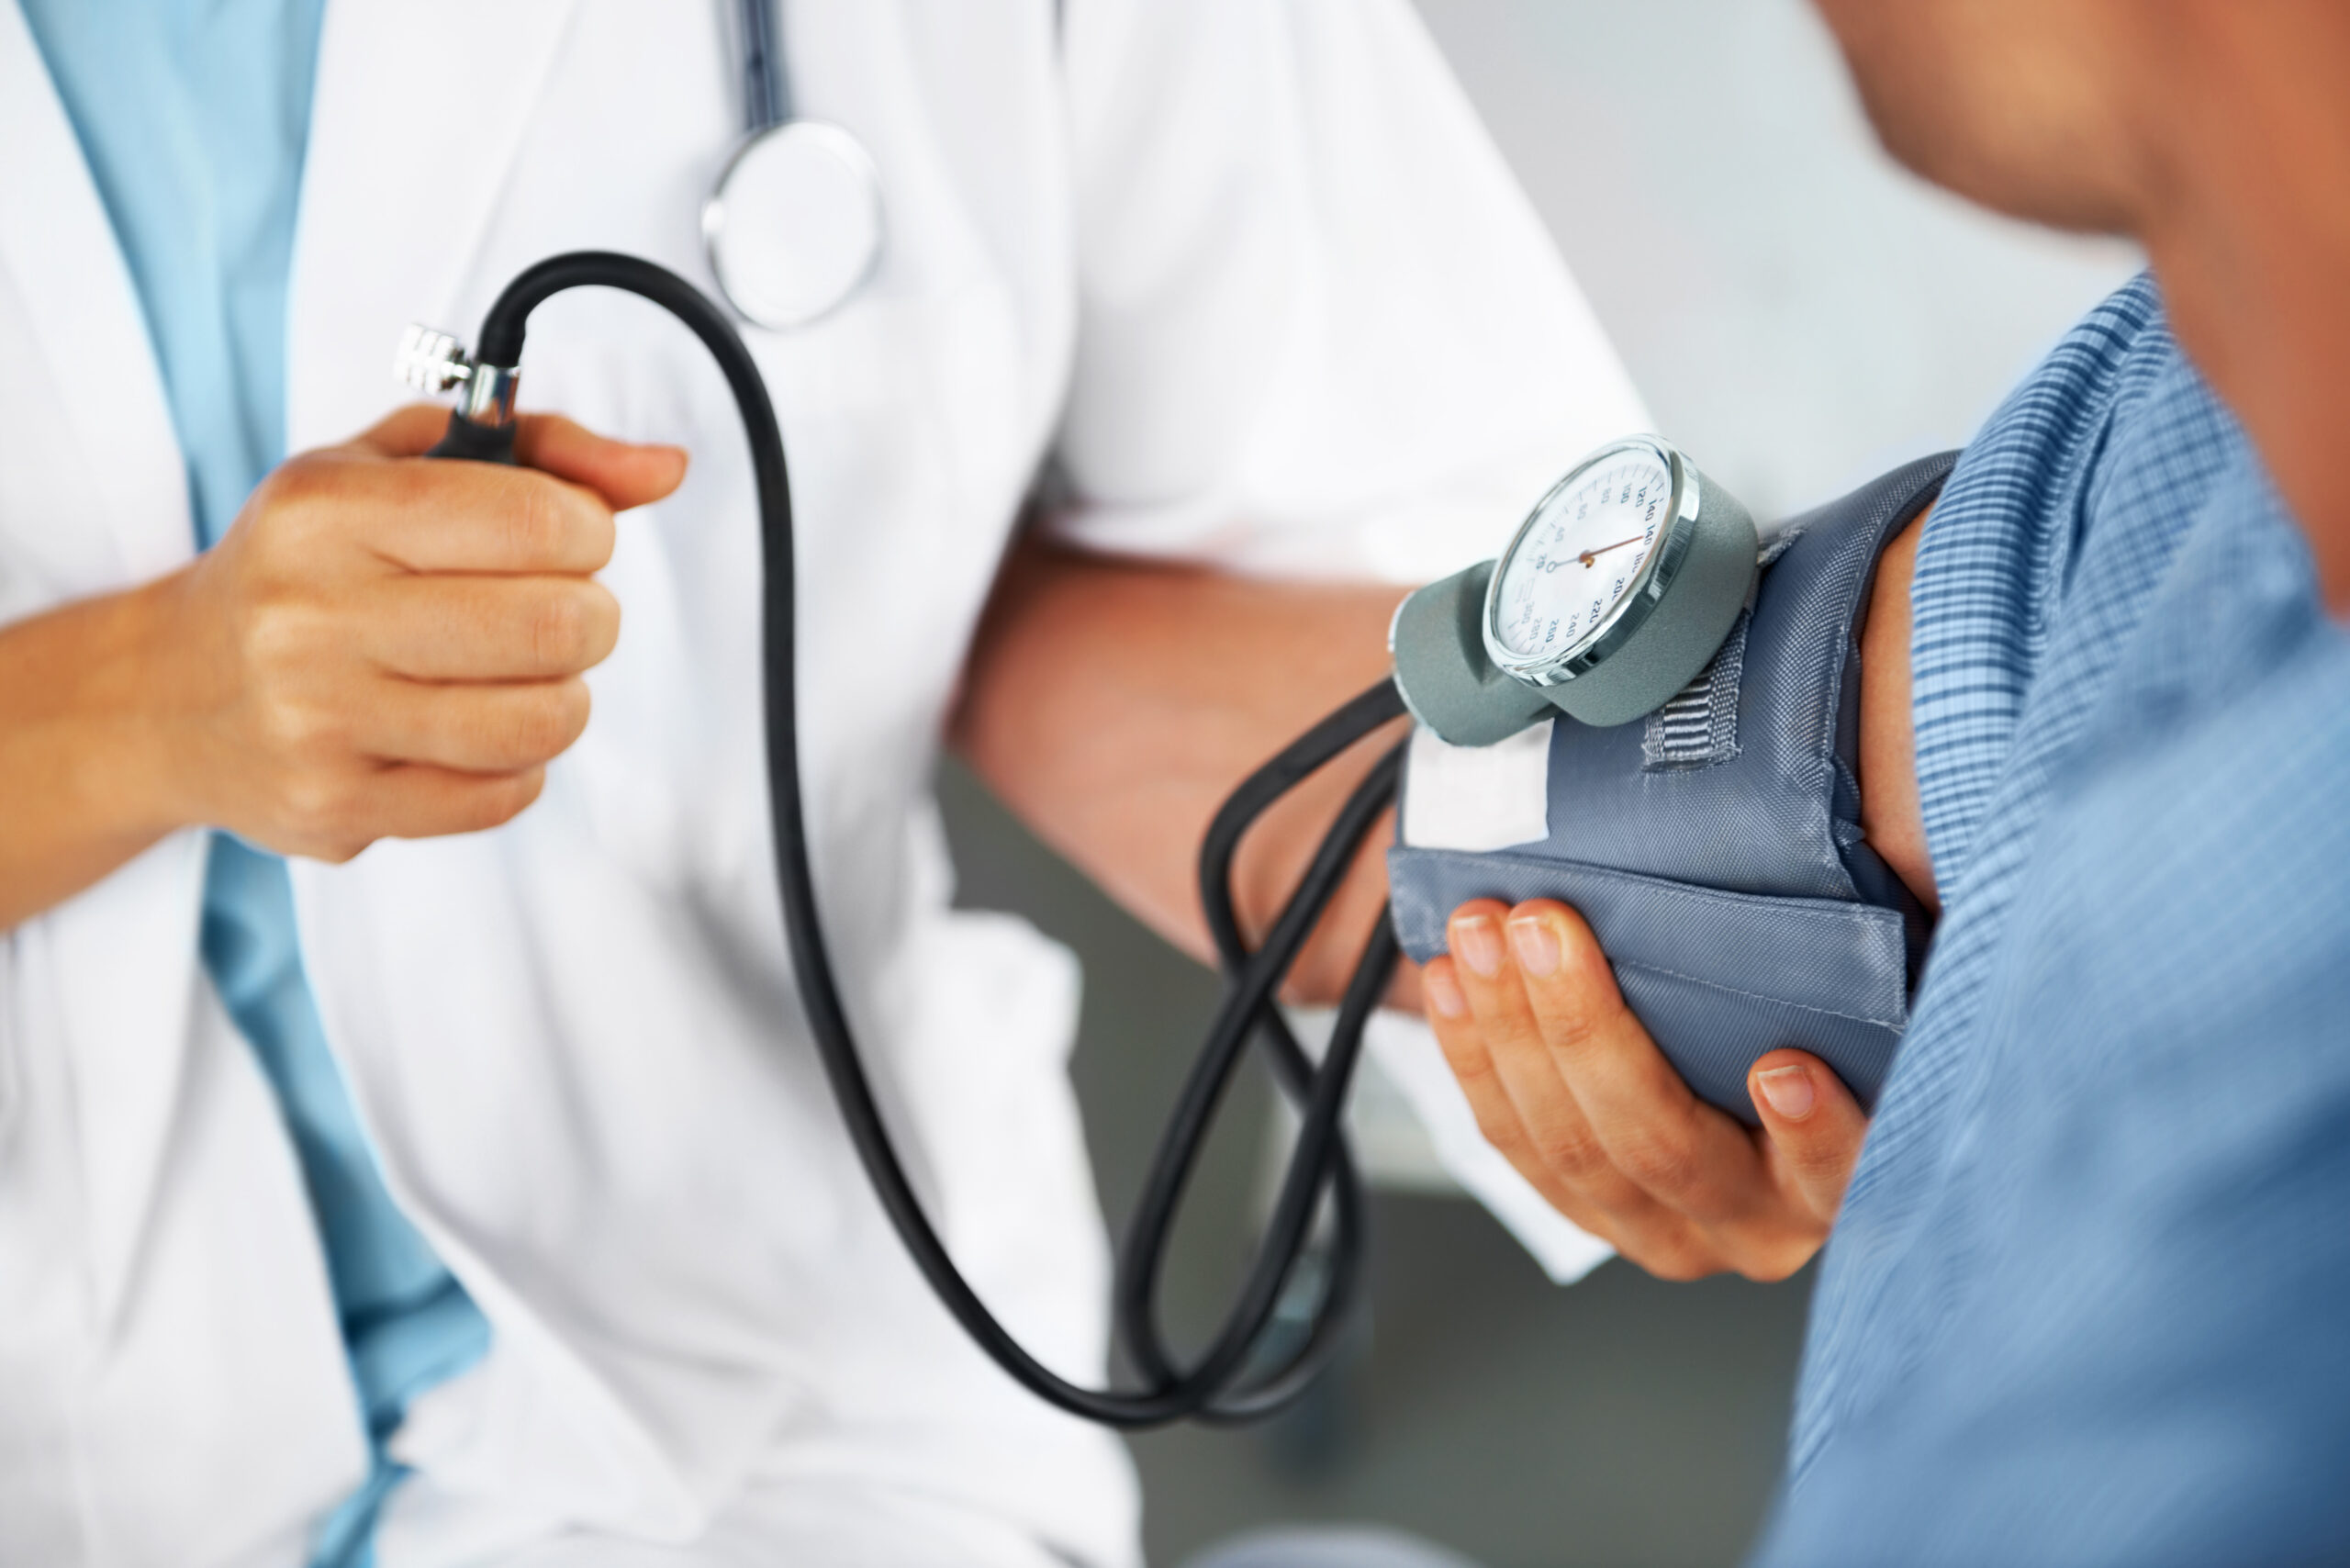 A doctor check's patient's blood pressure with arm cuff